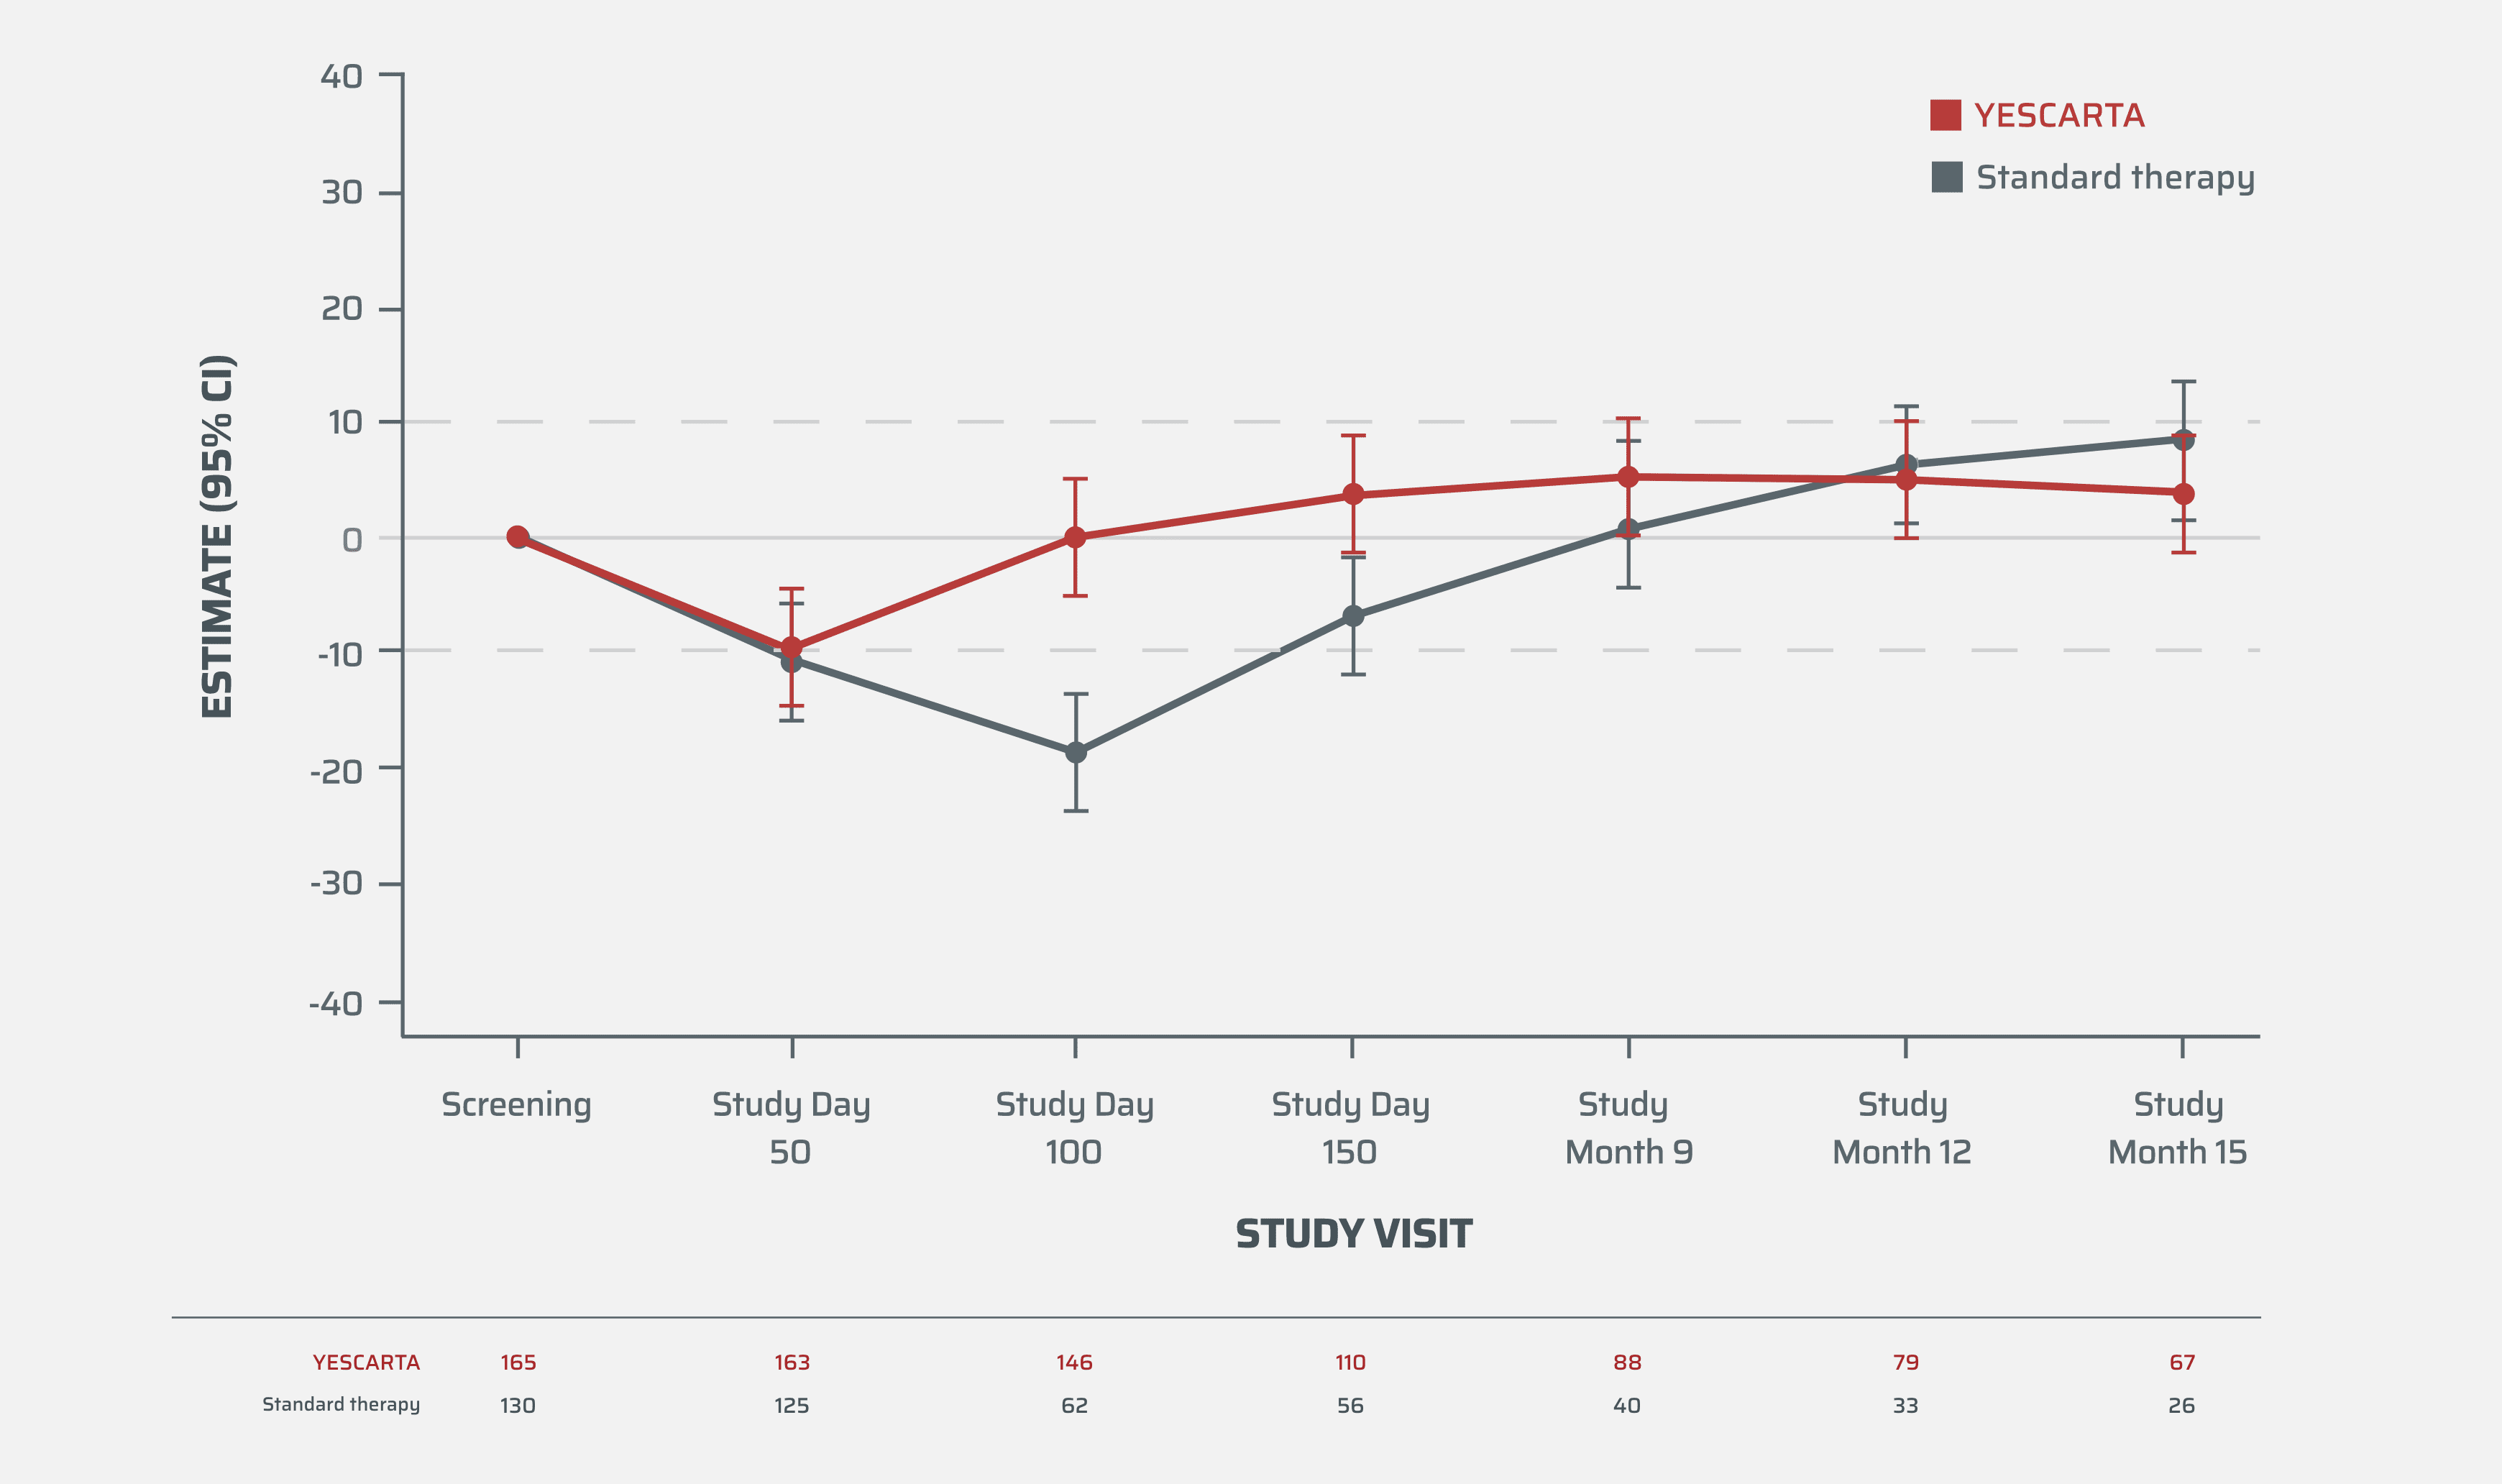 Line chart showing change from screening by visit in EORTC QLQ-C30 Global Health Status/QoL score.